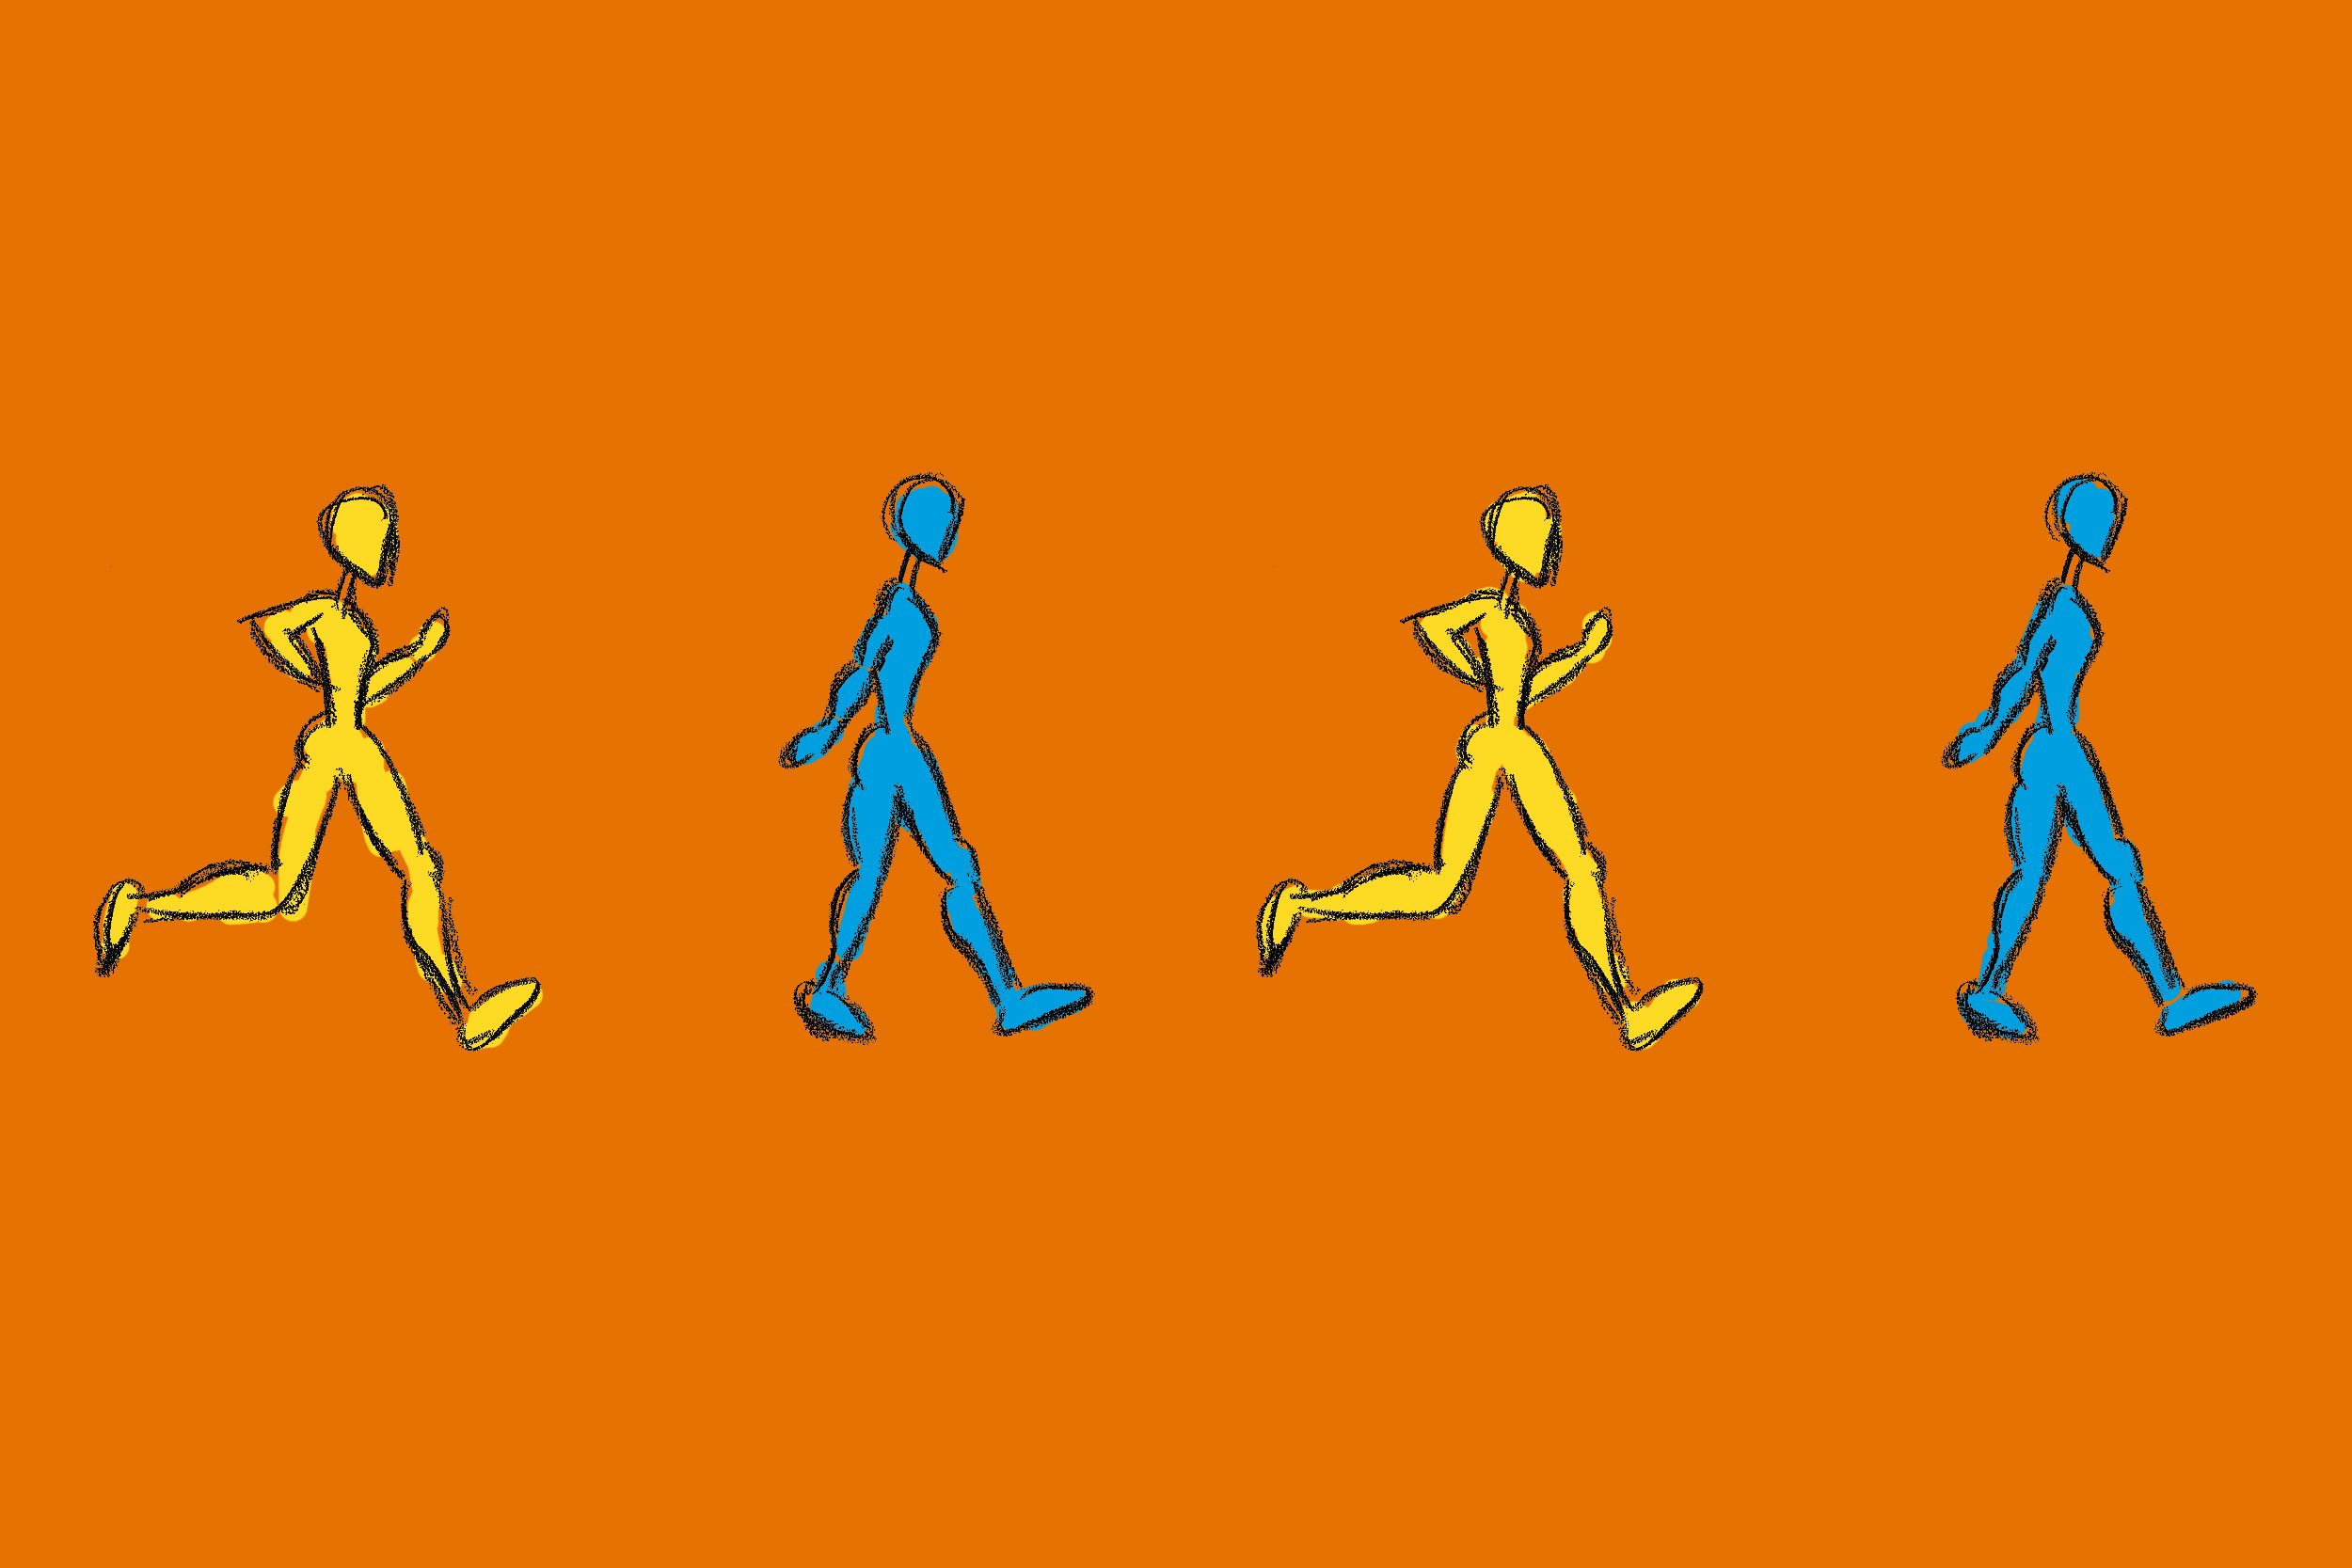 Illustrated people moving across the image.  two are running and two are walking